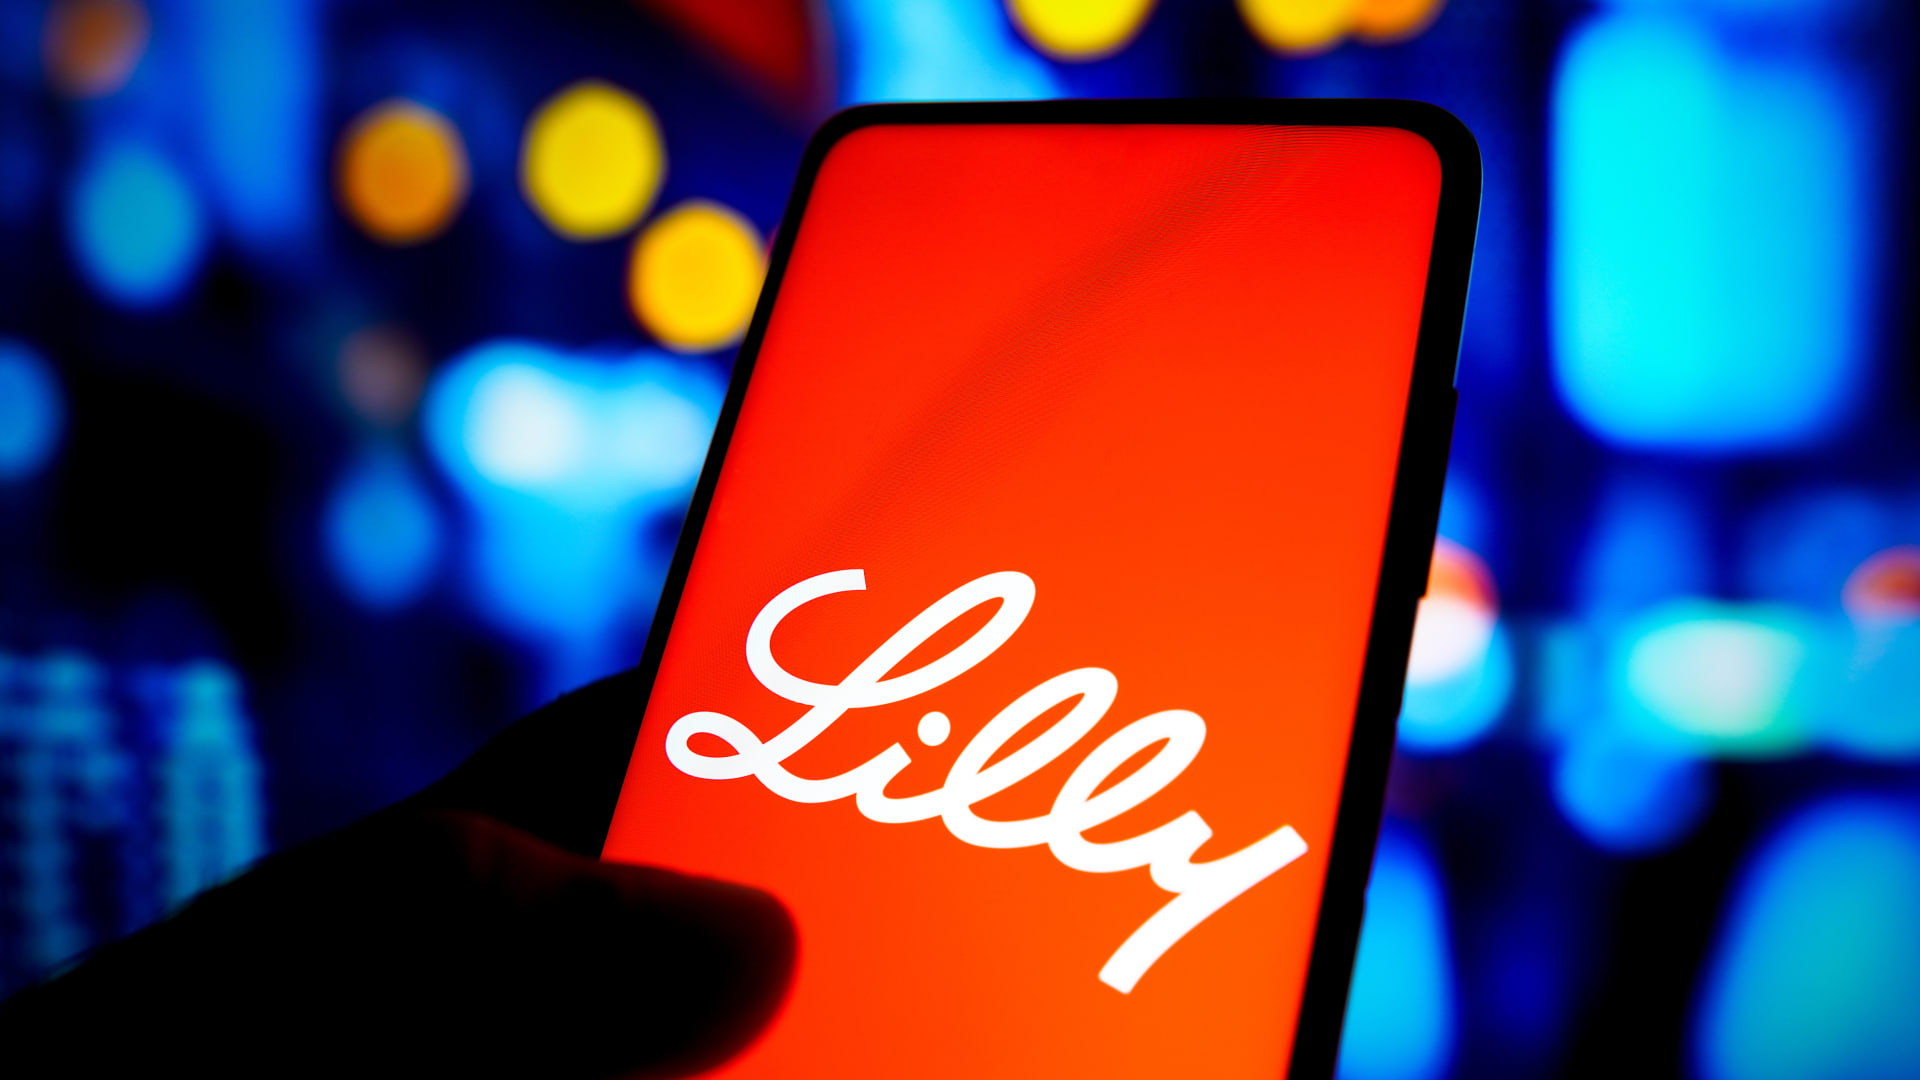 Eli Lilly (LLY) Q2 2023 earnings report